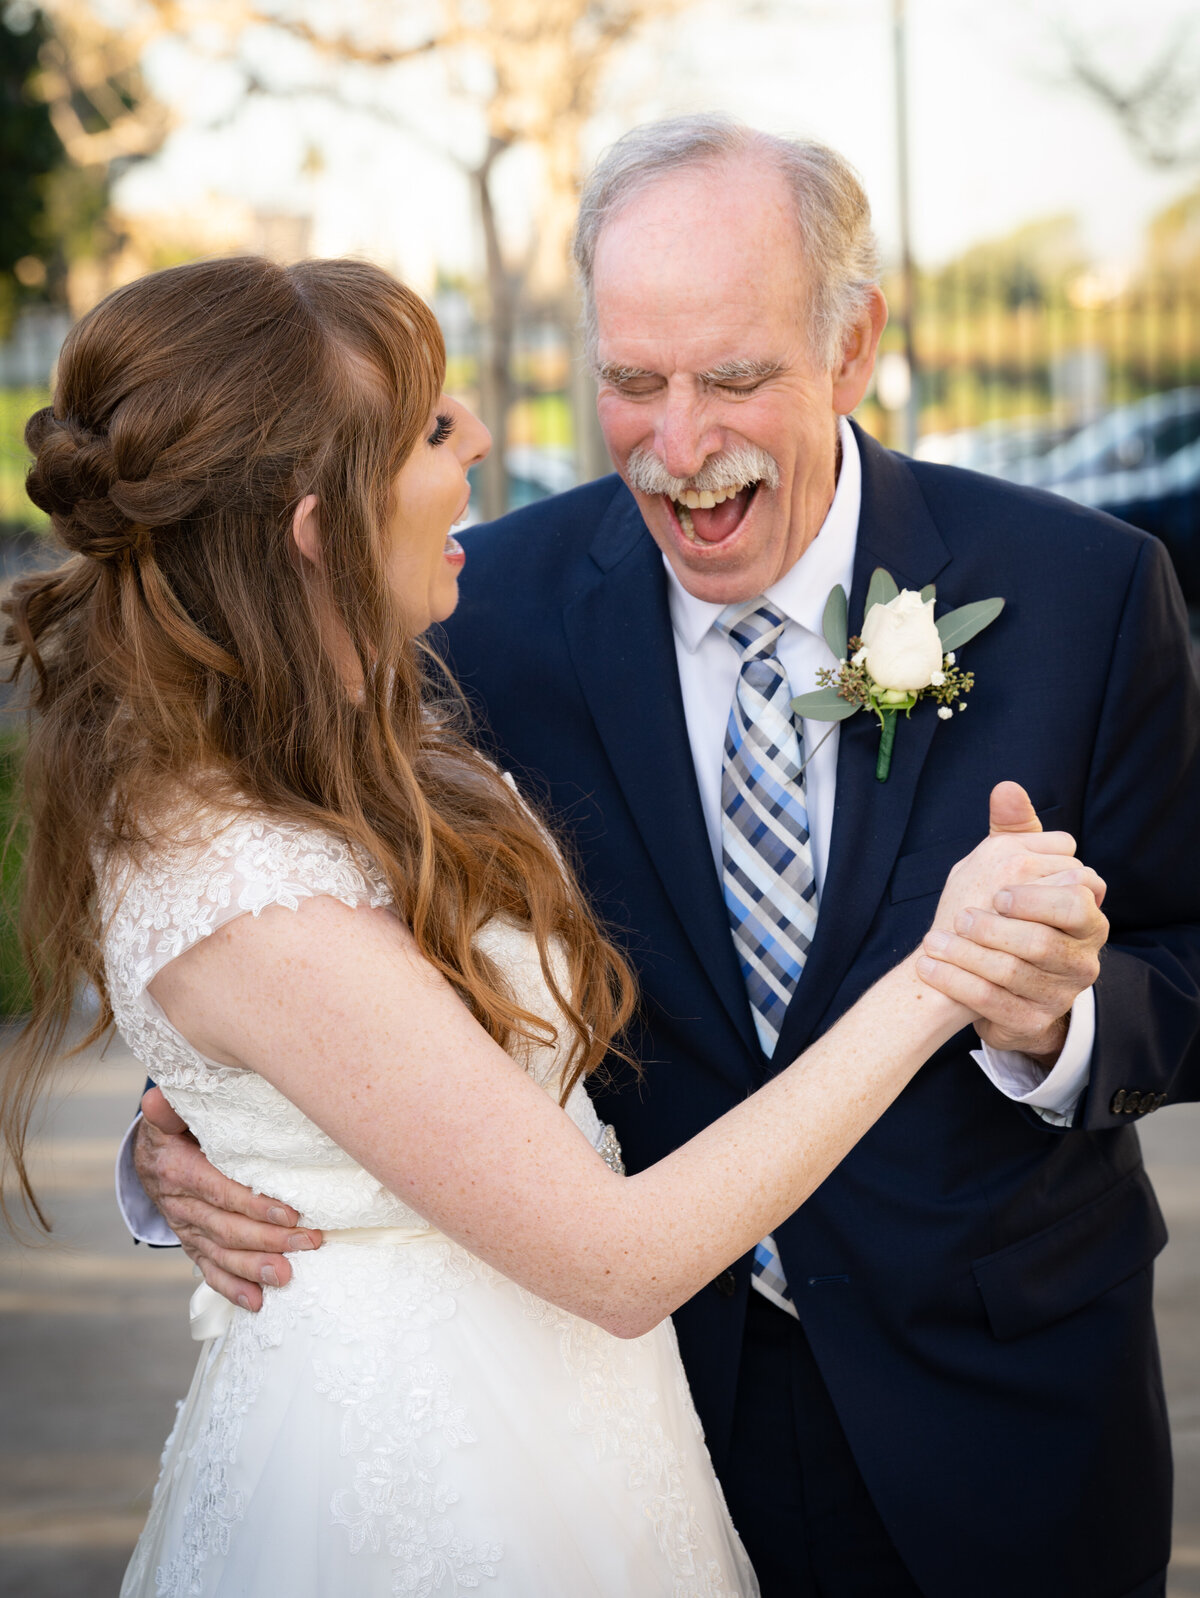 Elderly father in a navy suit with white-rose boutonniere holds red-headed daughter and laughs heartily with her during their special dance at her wedding. Photo by SAVI Photography - Los Angeles CA Photographer